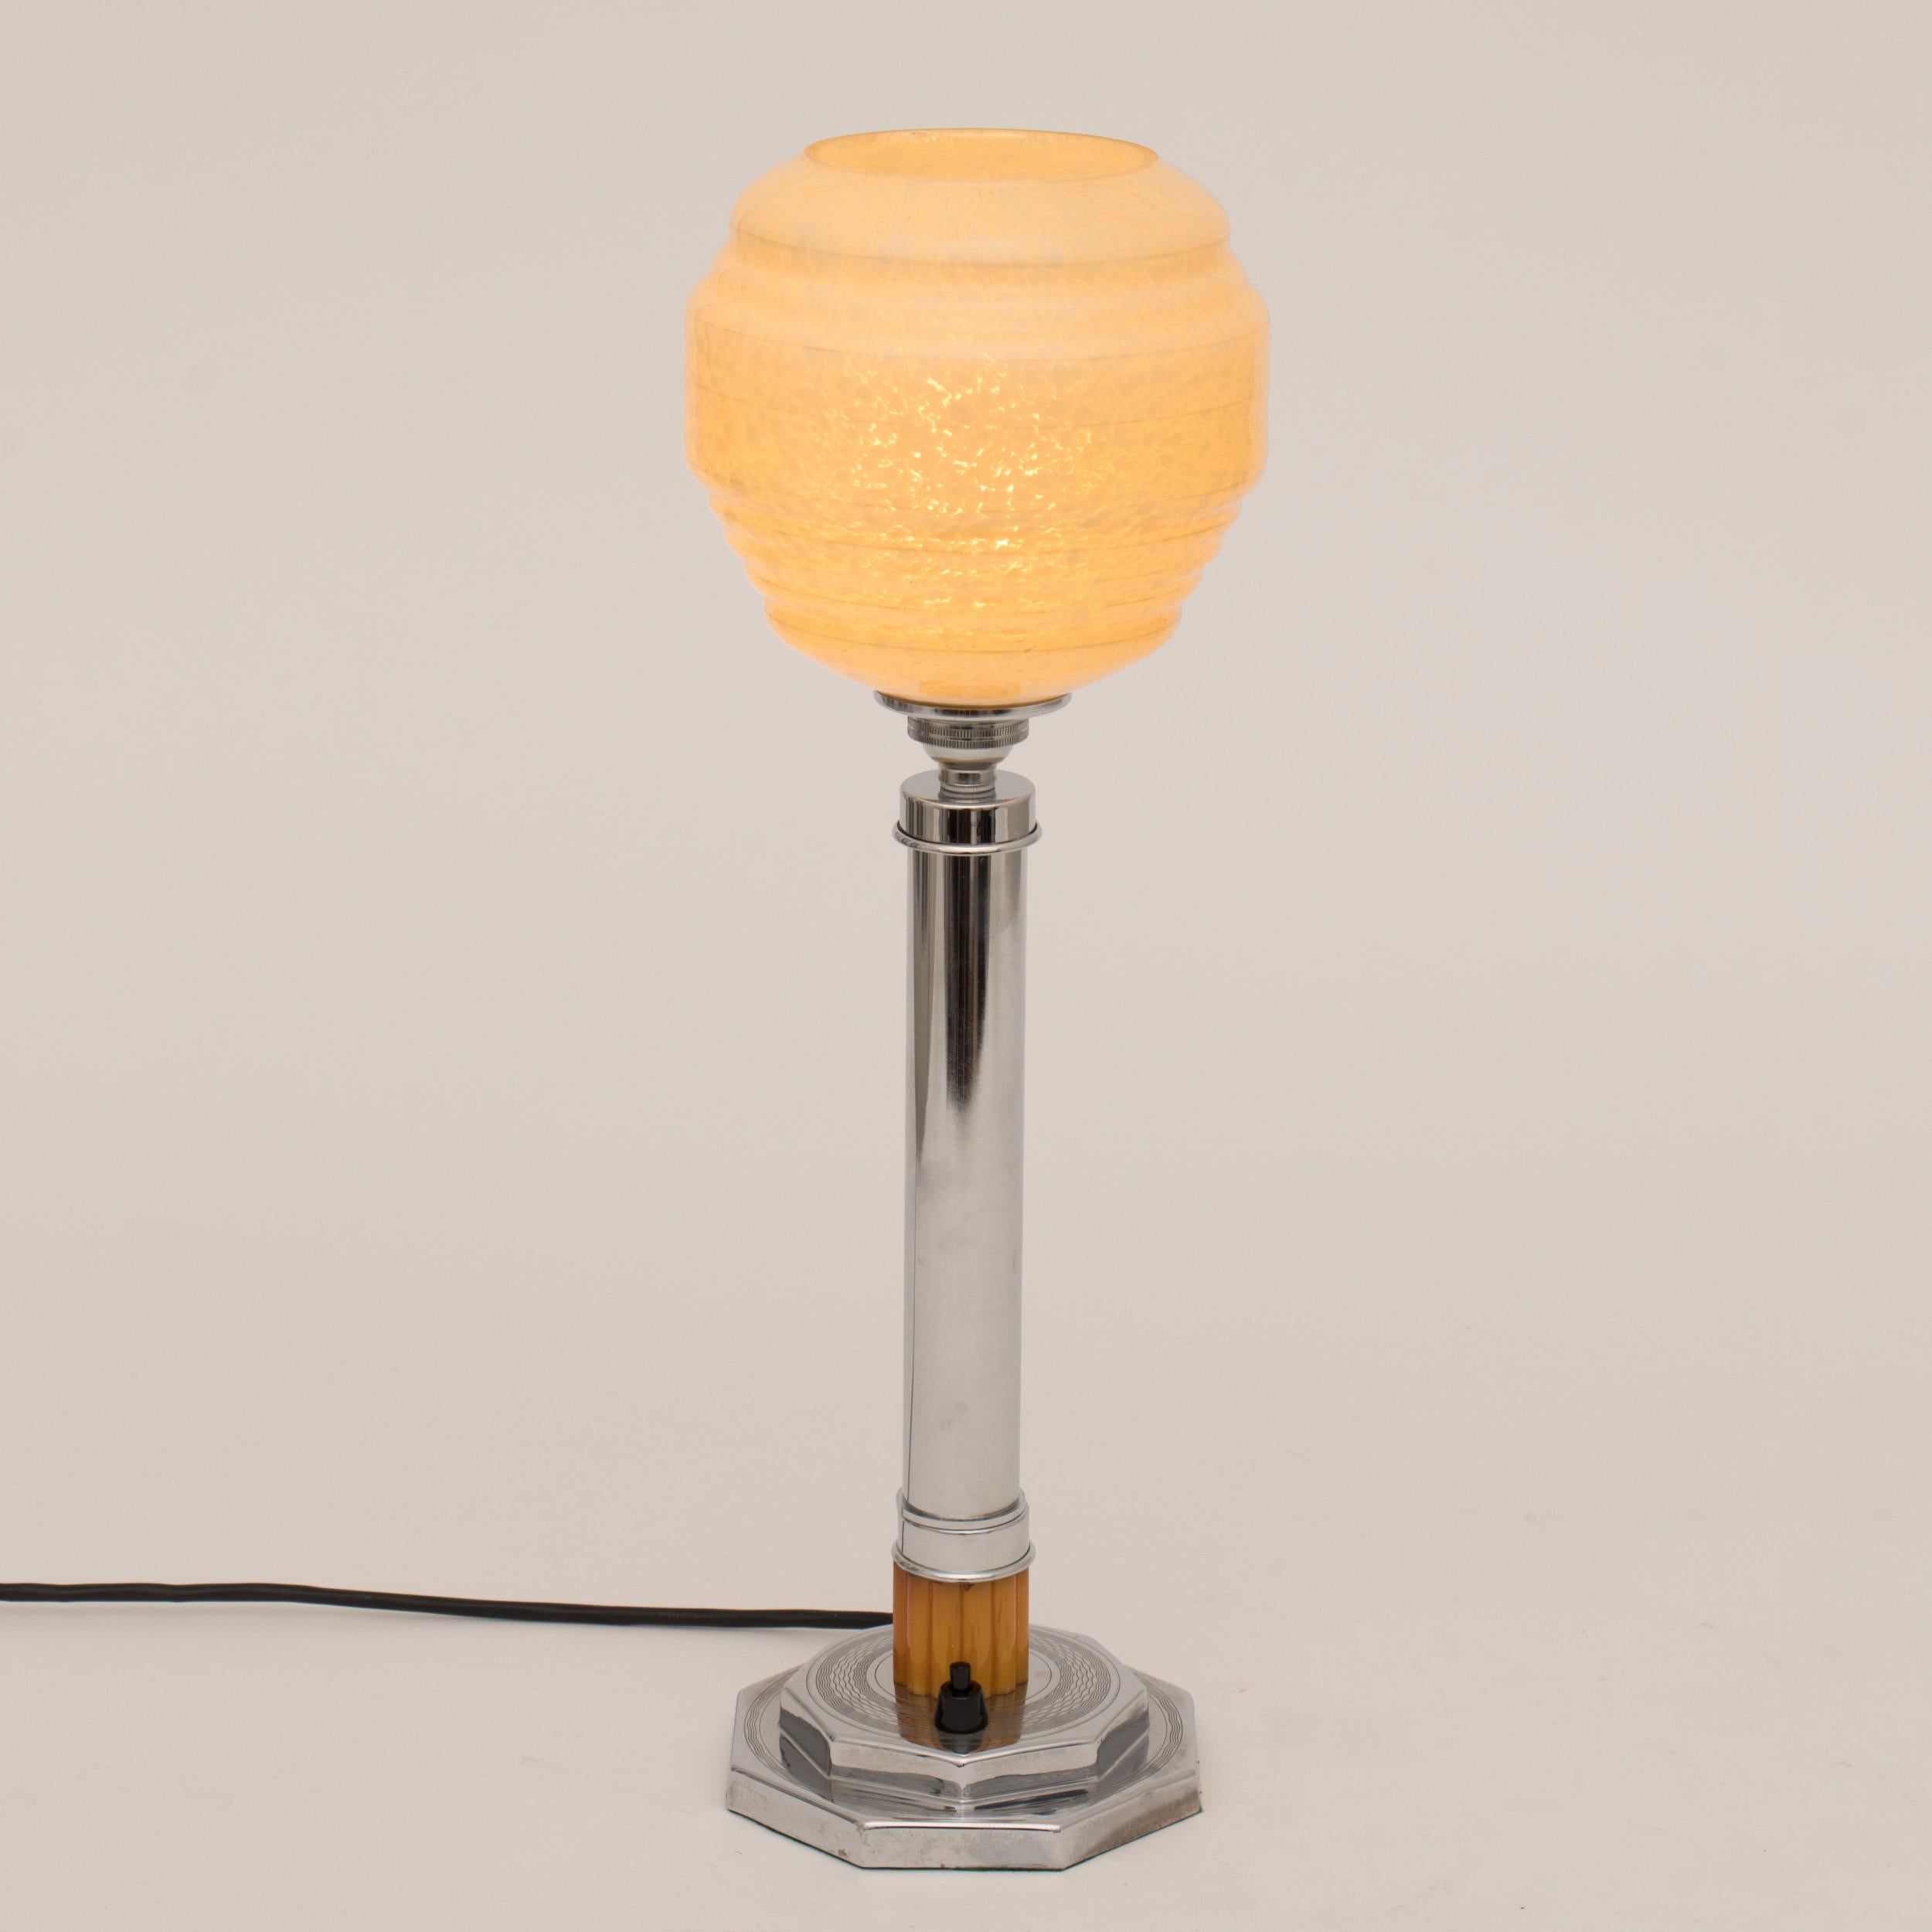 Art Deco table lamp
Chrome and Bakelite column with yellow mottled glass shade
Measures: H 45cm W 15cm D 15cm
British circa 1930.